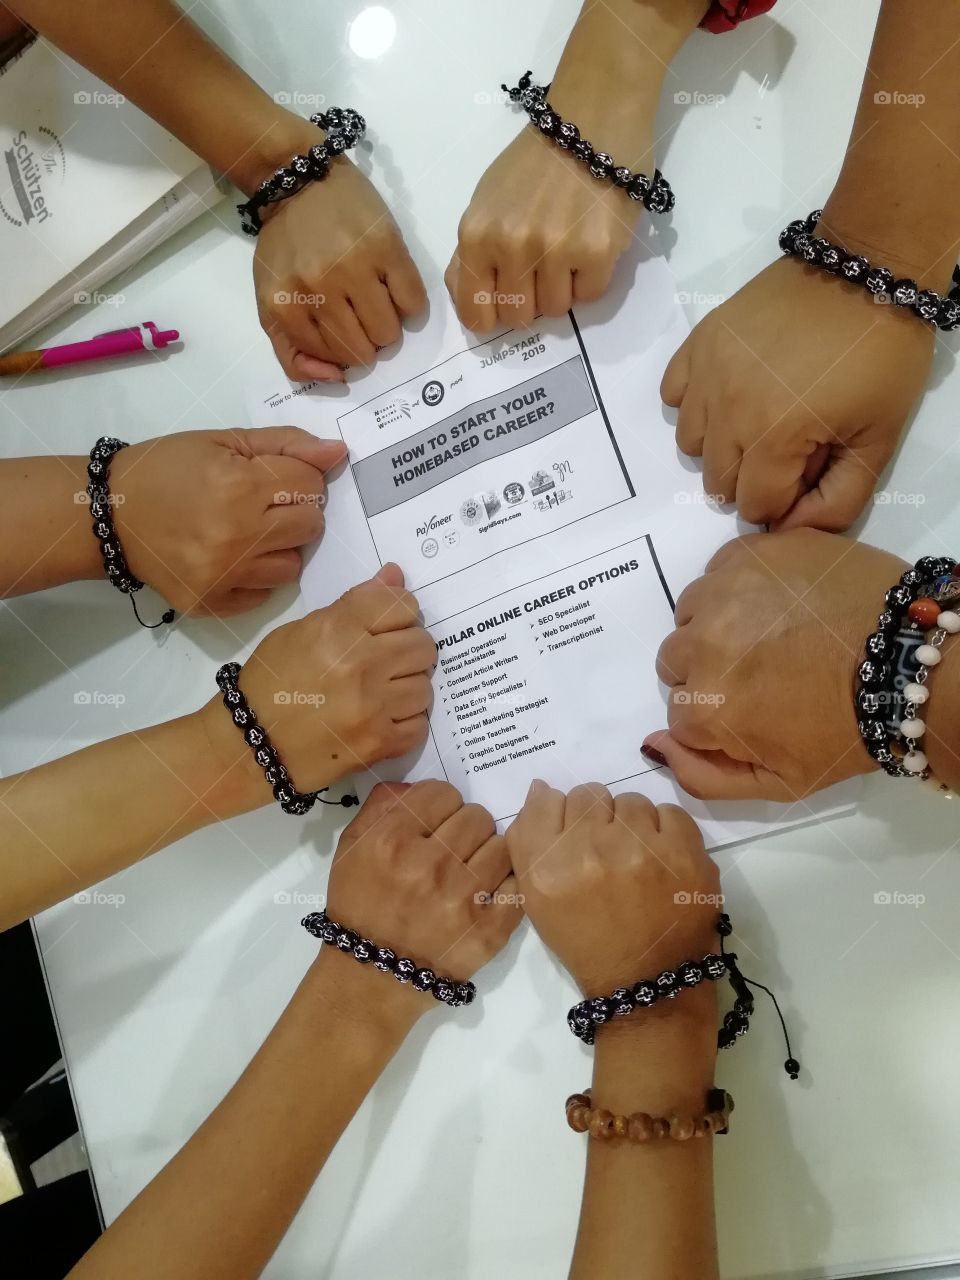 This photo is about working together. Eight women gathered together to upgrade their online skills. The uniform bracelets are our "certificates" after finishing the workshop.